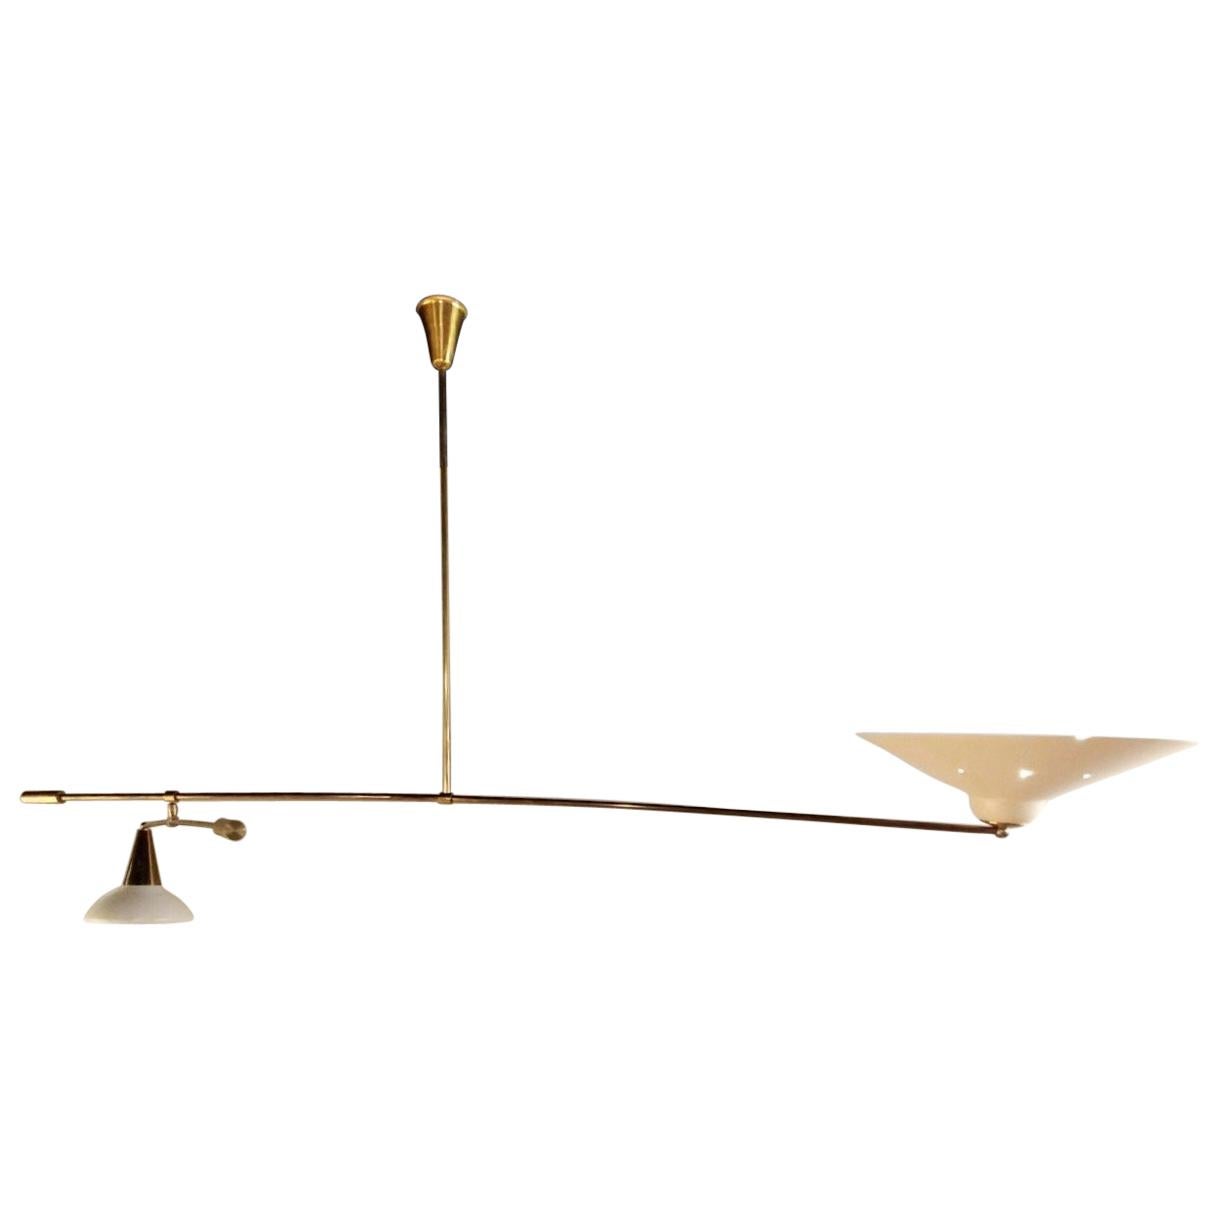 Midcentury Italian Brass and Lacquered Metal Chandelier with Two Articulate Arms